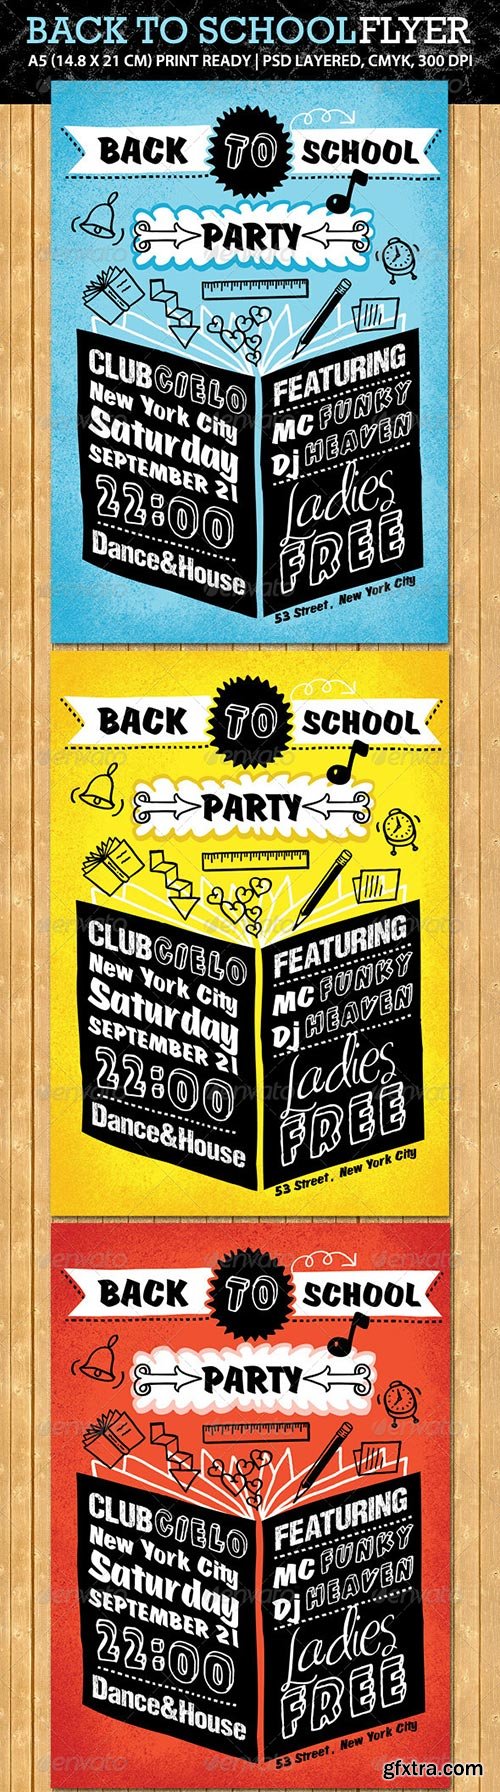 GraphicRiver - Back to School Party Flyer 5447212